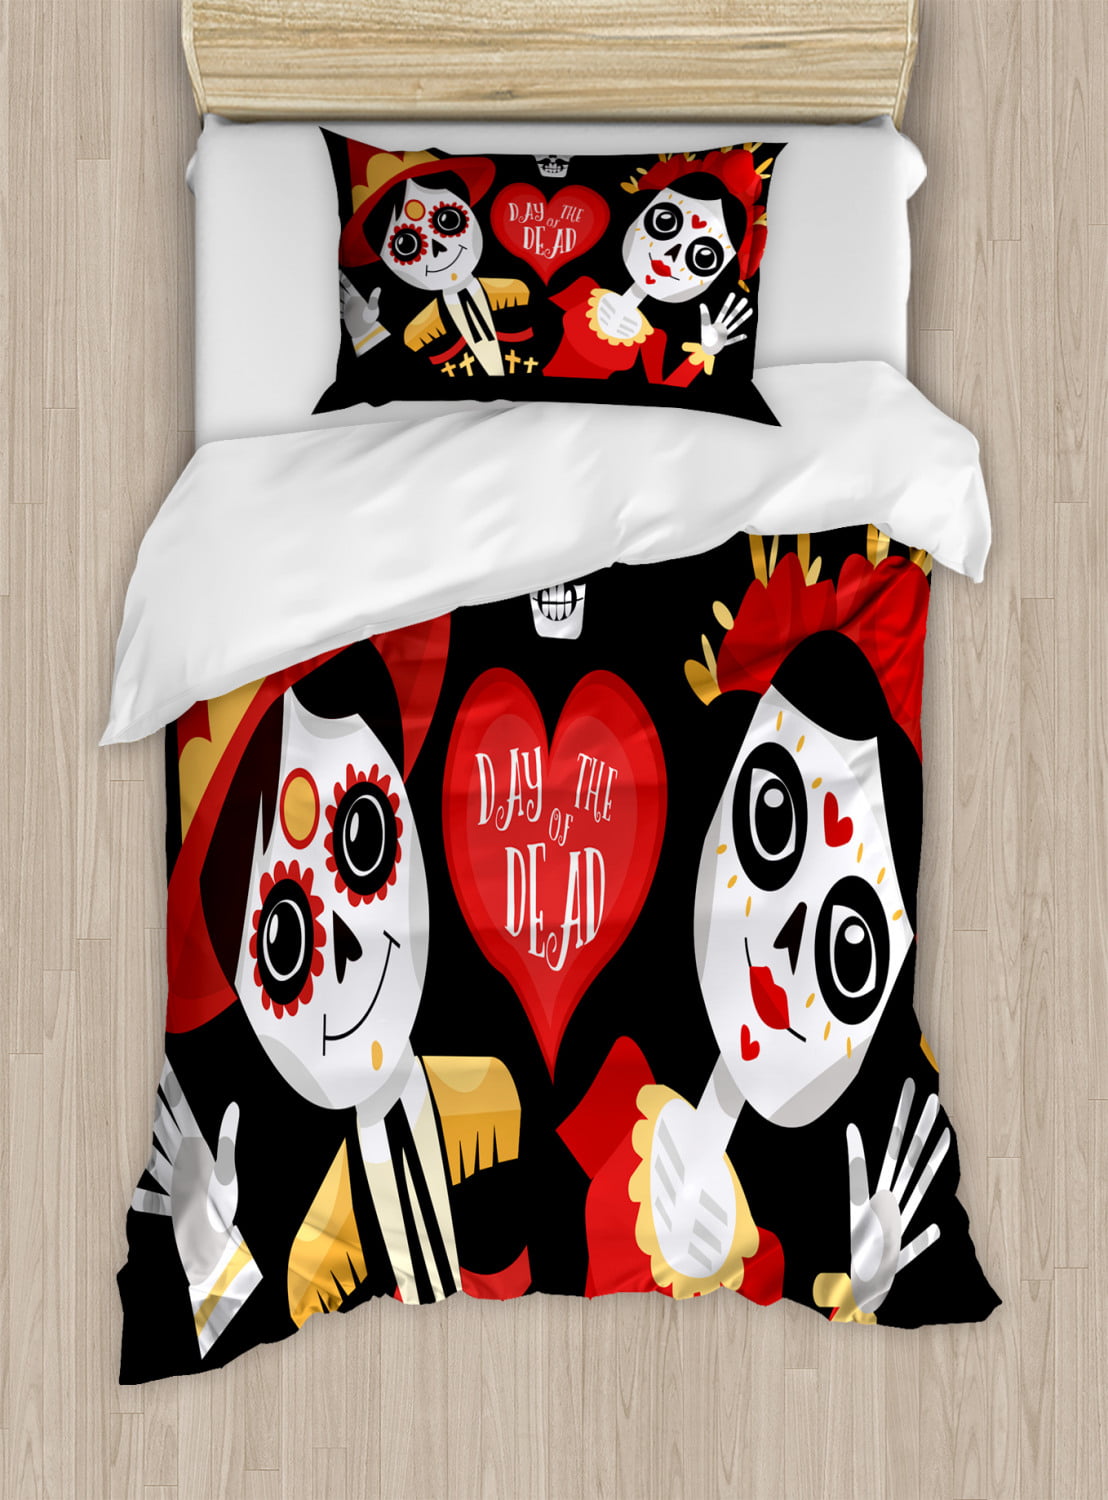 Red Skull Duvet Cover Set Twin Queen King Size Bedding Pillow Case Day of Dead 